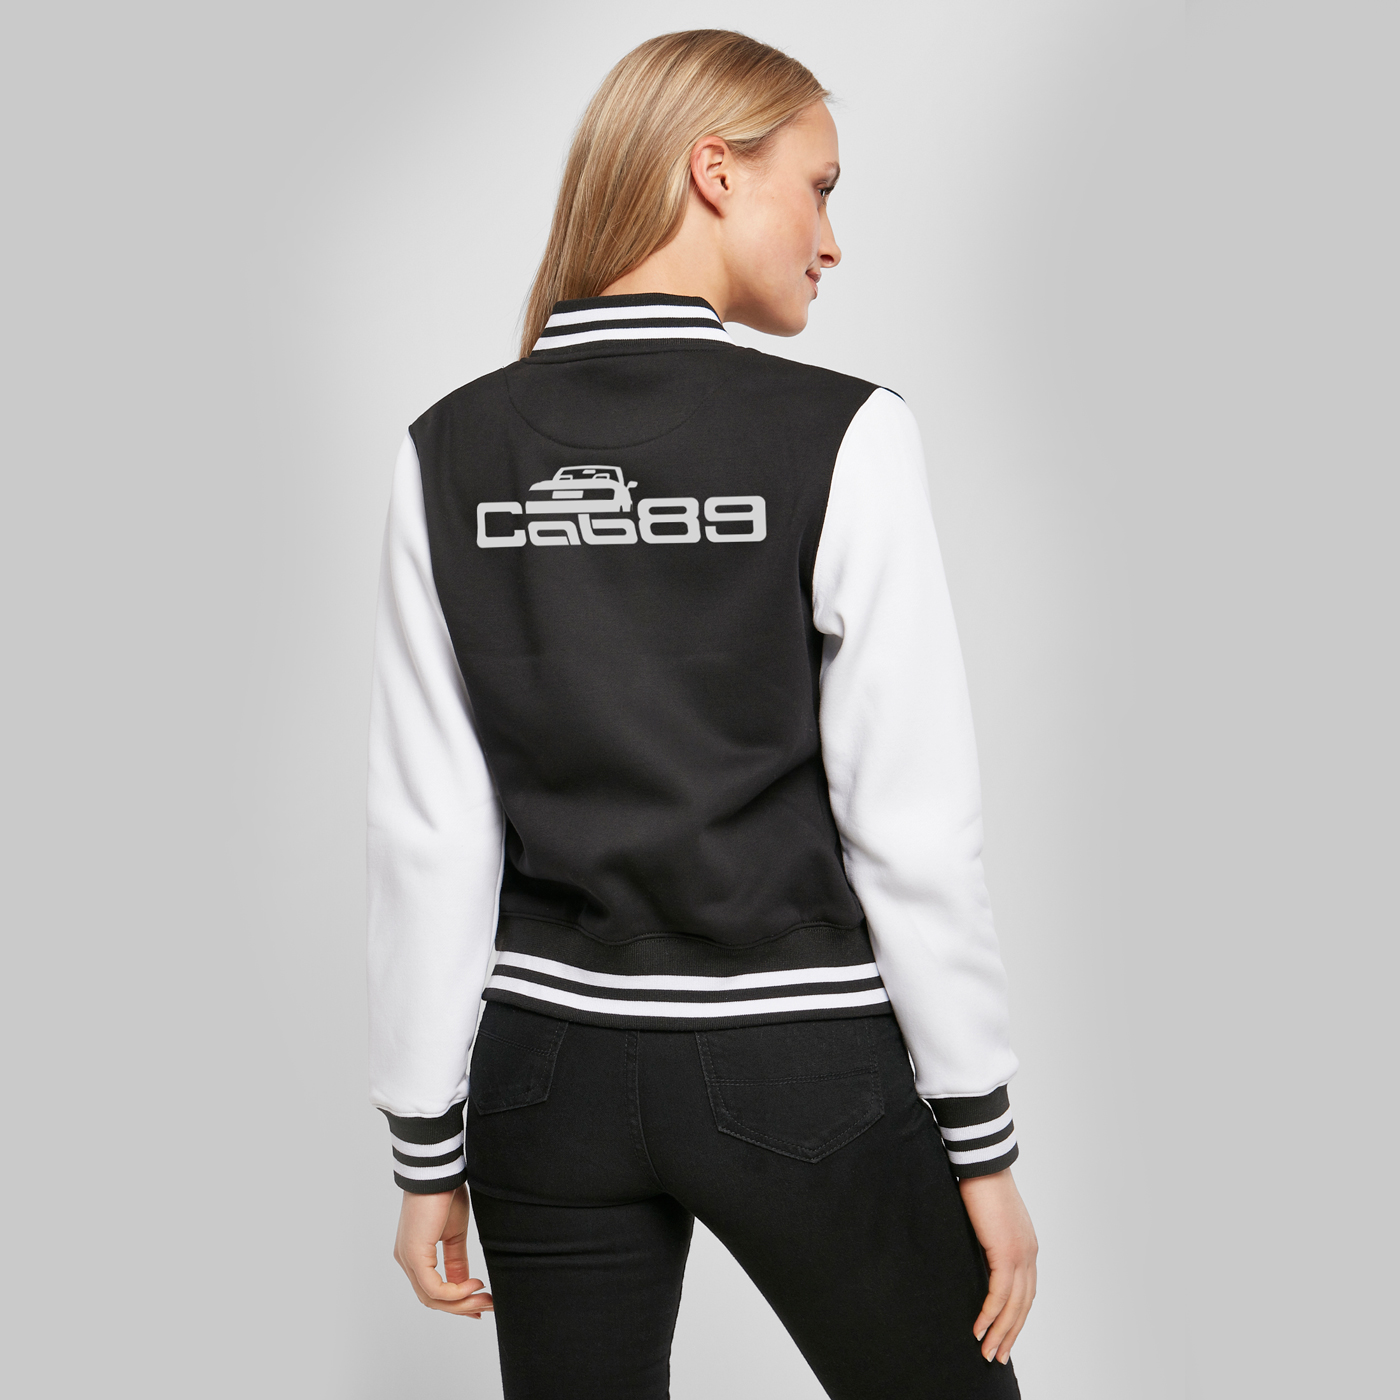 Collegejacke "CAB89" Woman